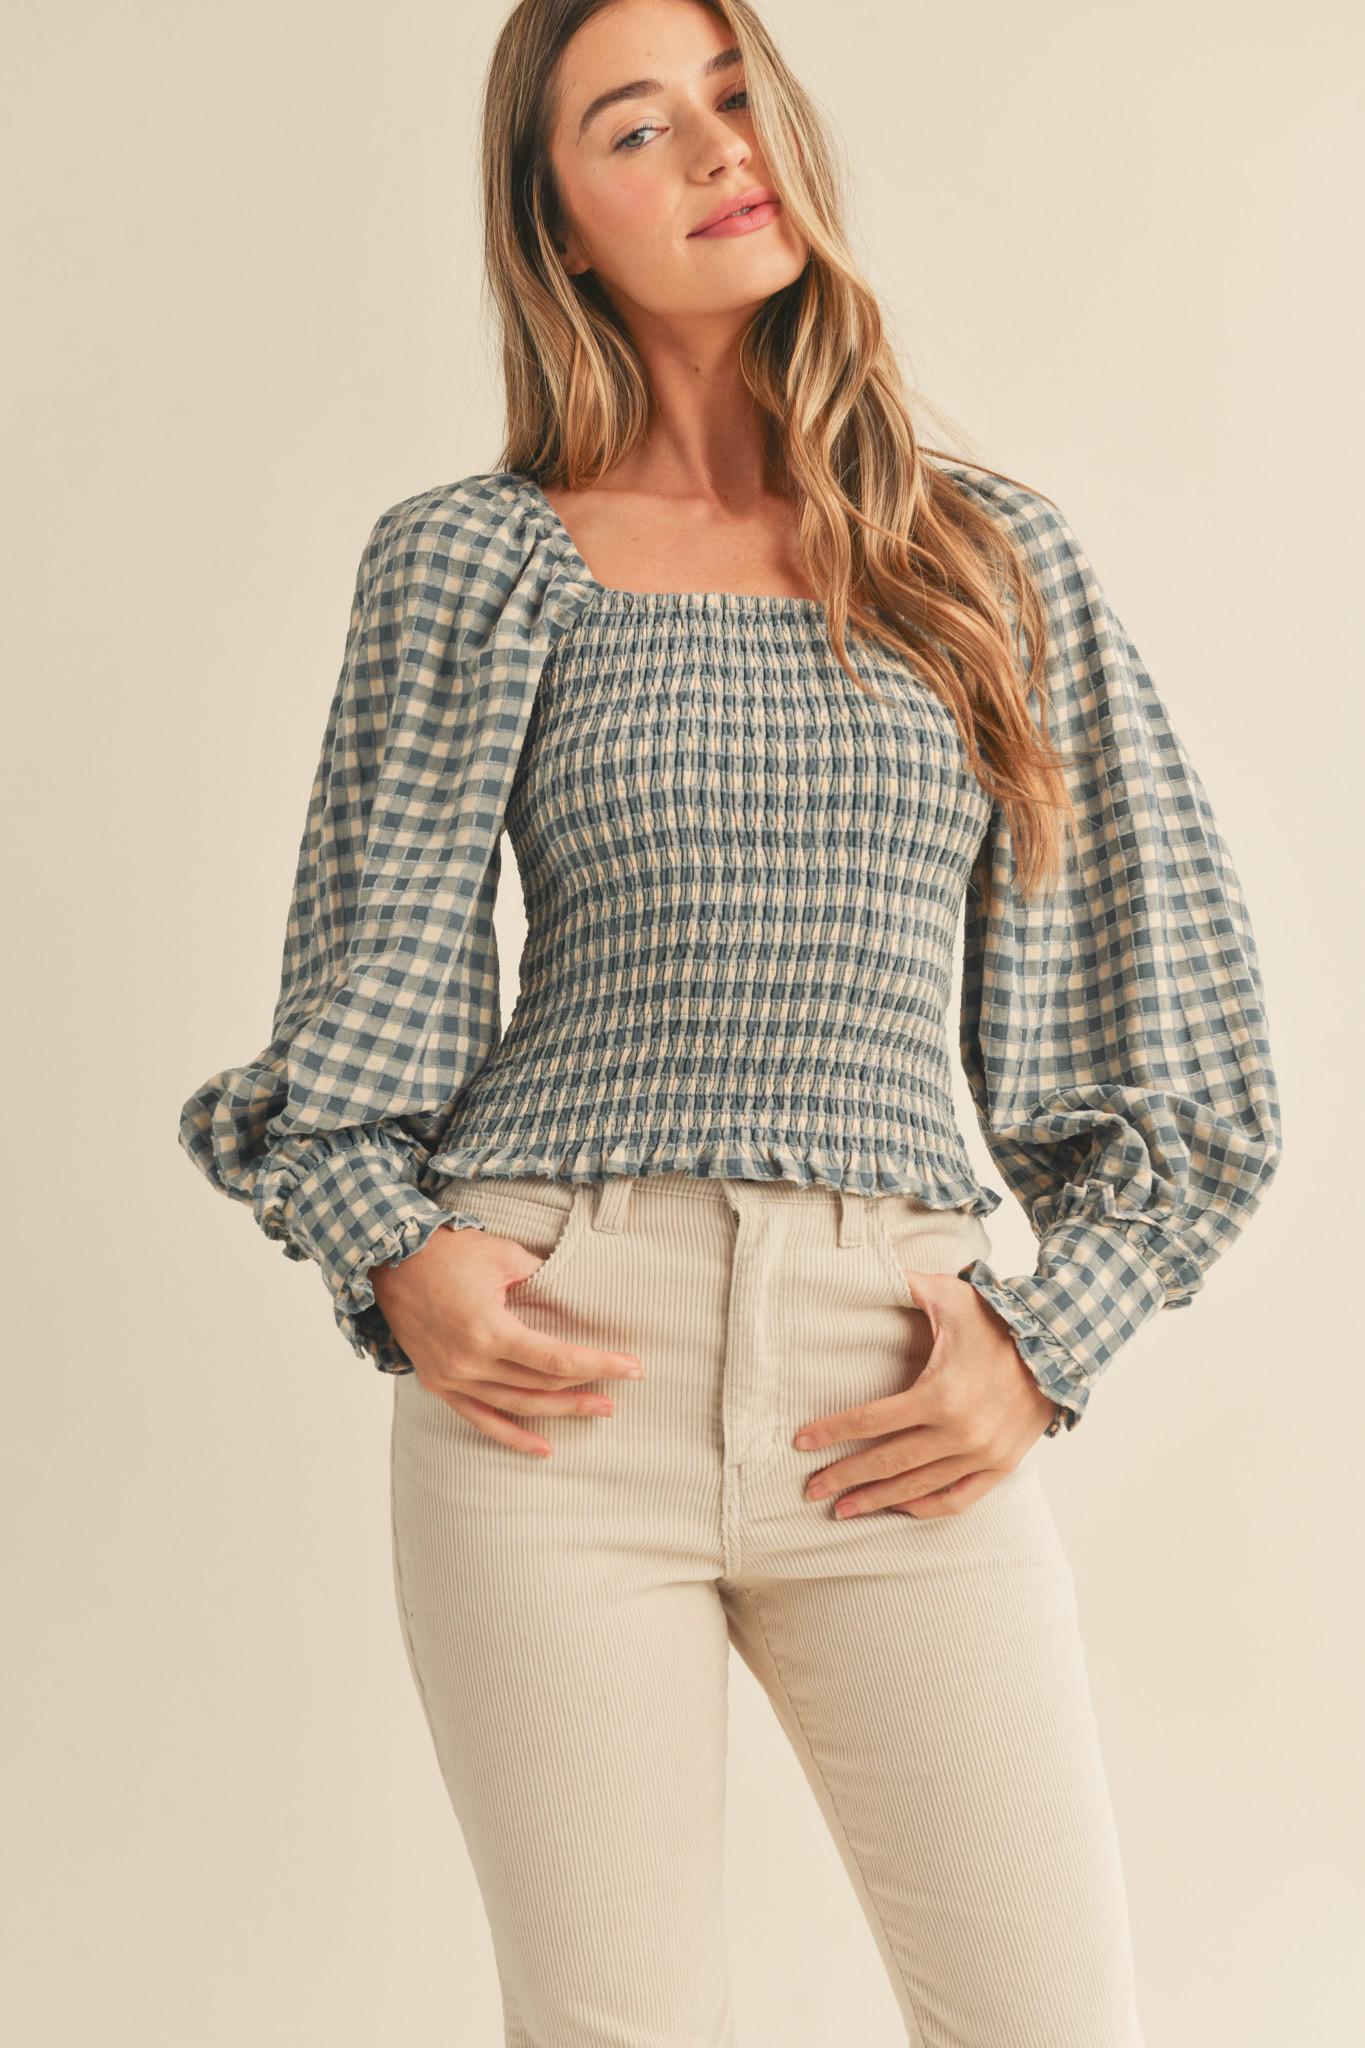 Dusty blue ruffle neck top by Increscent